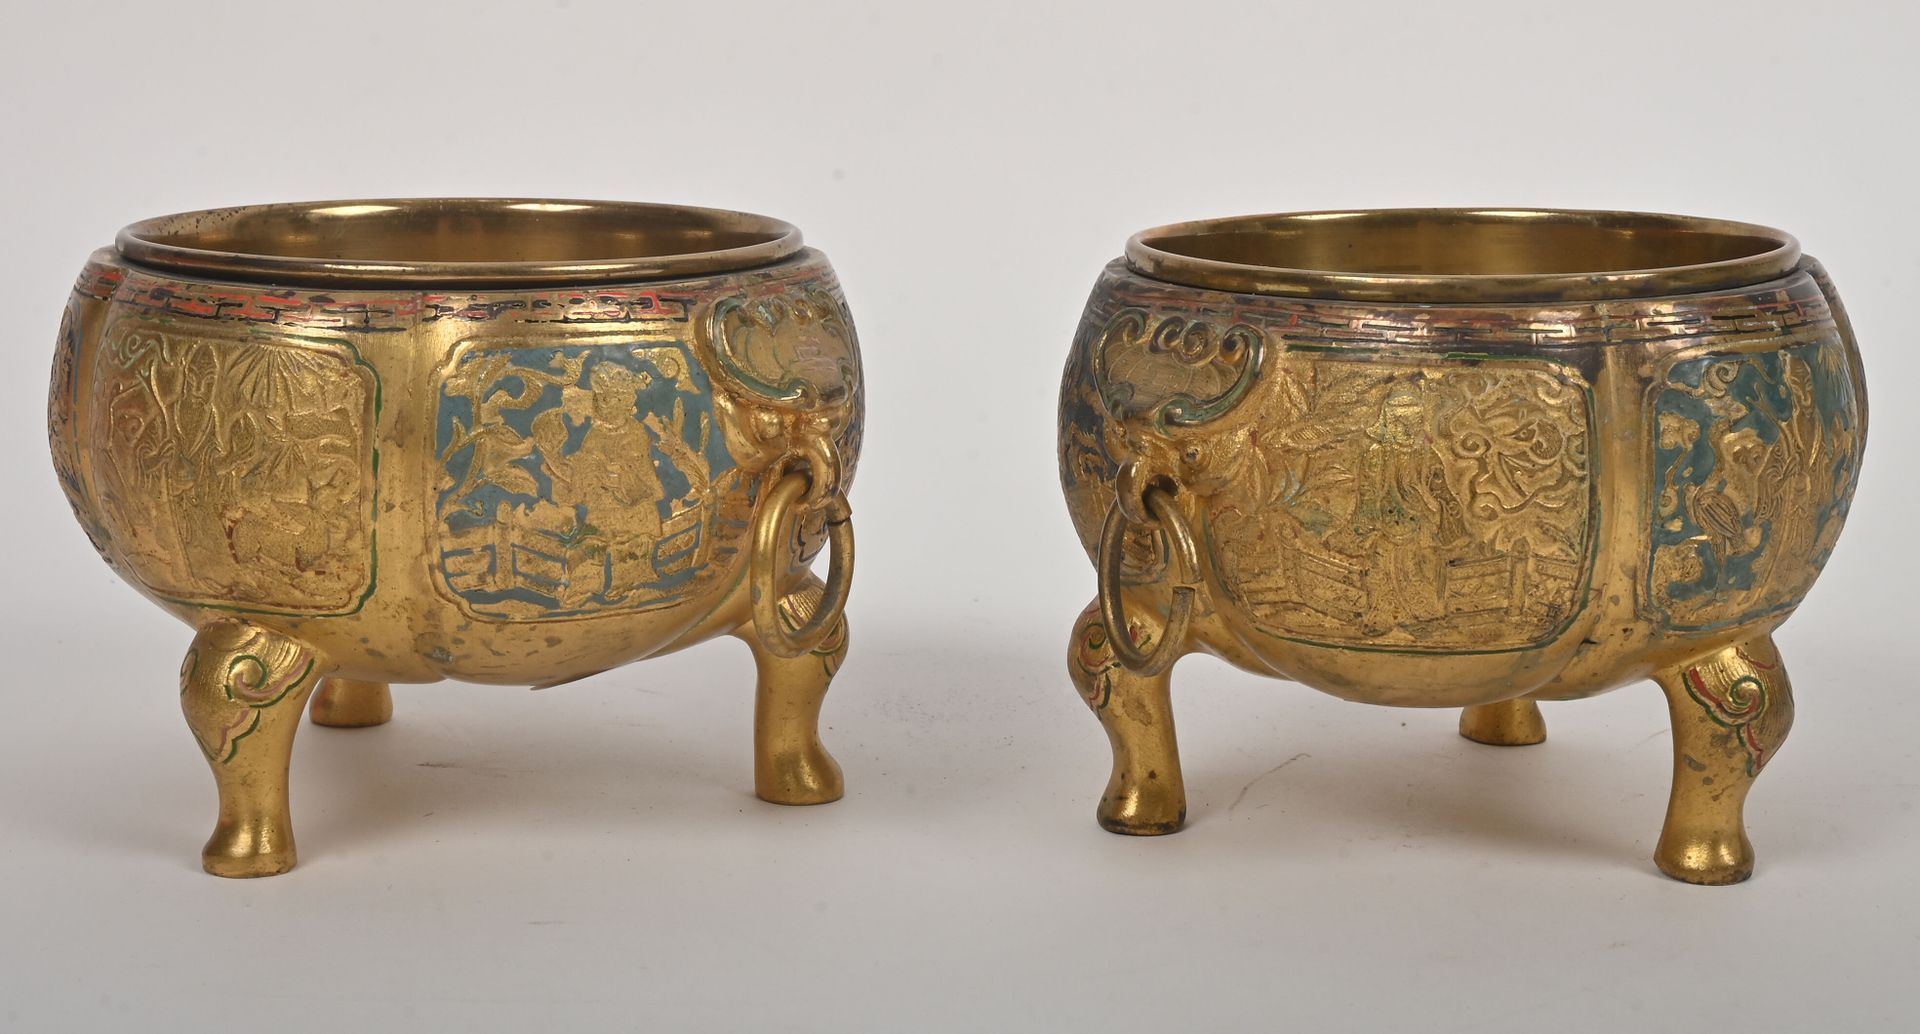 Null Susse Brothers
Pair of bronze pots in the shape of coloquint with decoratio&hellip;